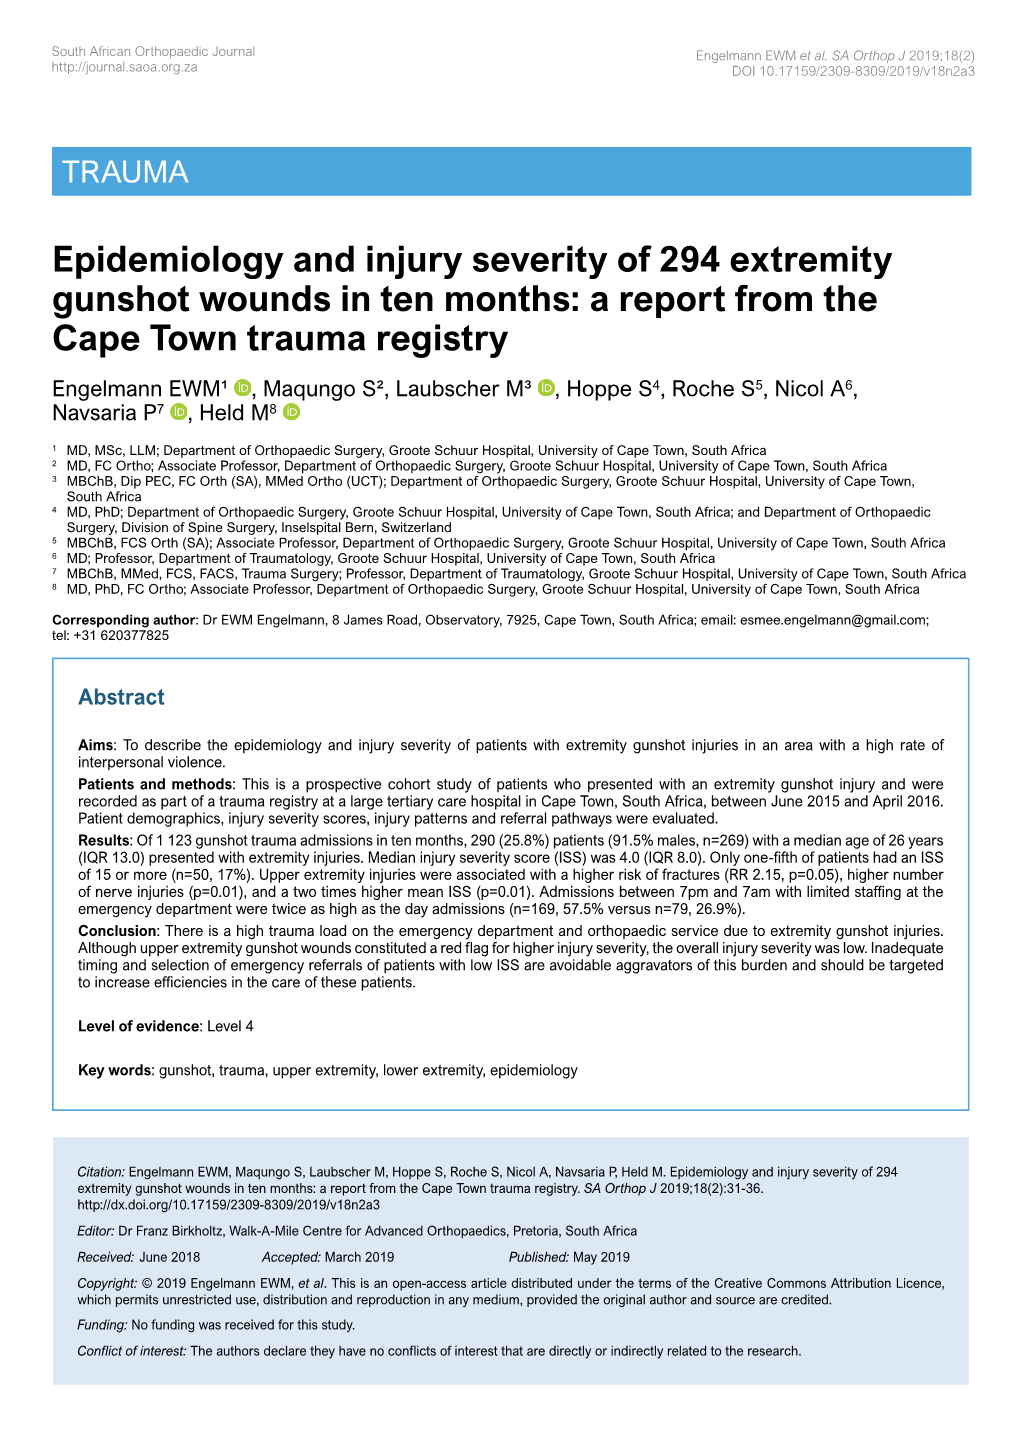 Epidemiology and Injury Severity of 294 Extremity Gunshot Wounds In